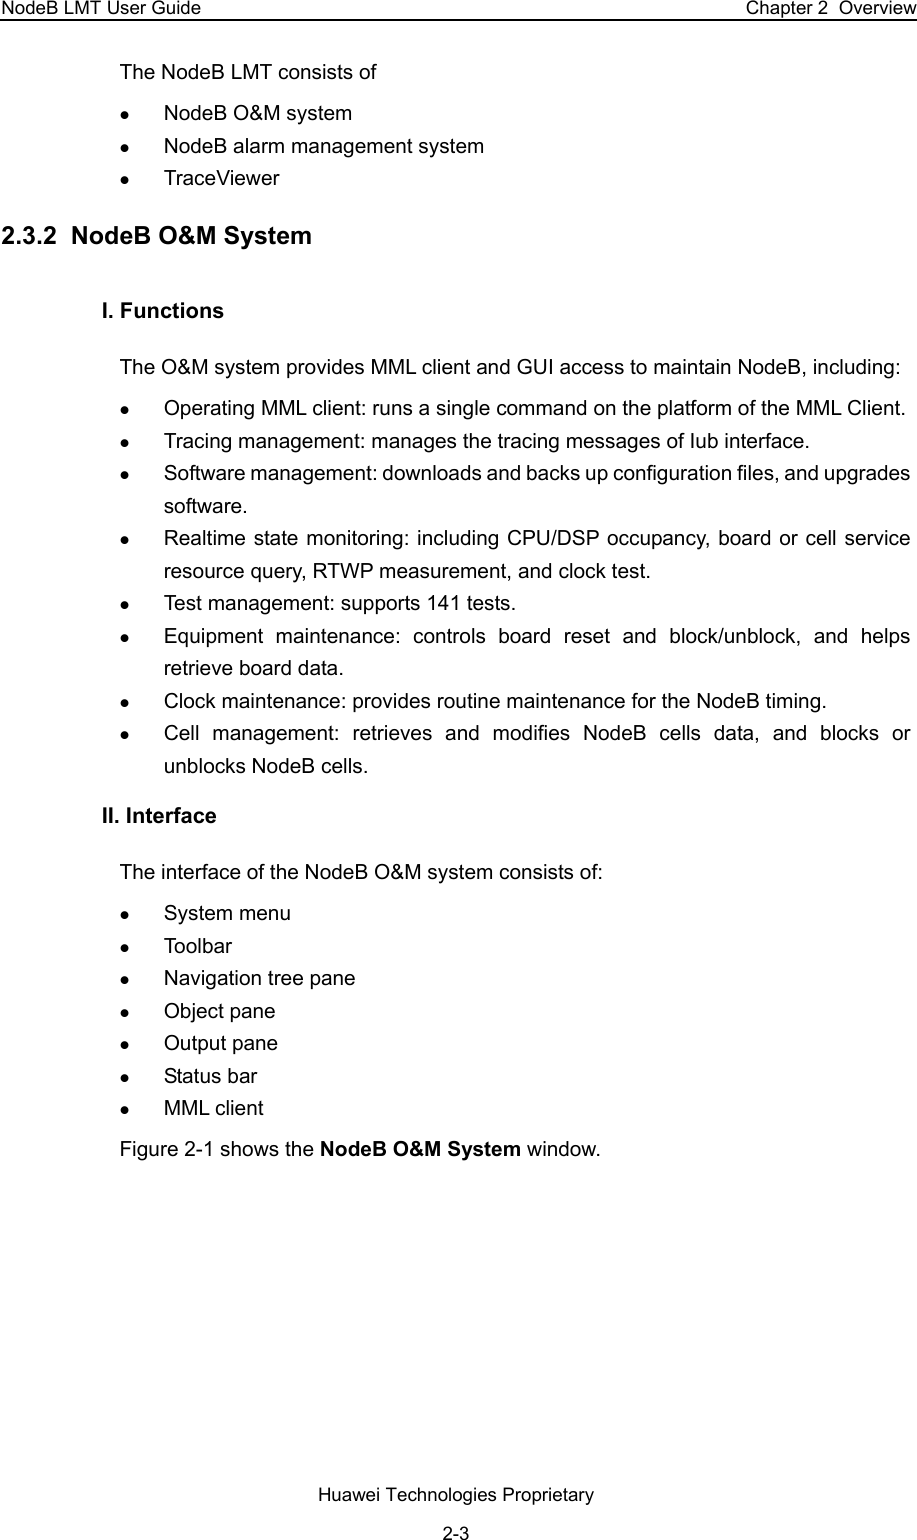 NodeB LMT User Guide  Chapter 2  Overview The NodeB LMT consists of z NodeB O&amp;M system z NodeB alarm management system z TraceViewer 2.3.2  NodeB O&amp;M System I. Functions The O&amp;M system provides MML client and GUI access to maintain NodeB, including: z Operating MML client: runs a single command on the platform of the MML Client. z Tracing management: manages the tracing messages of Iub interface.  z Software management: downloads and backs up configuration files, and upgrades software. z Realtime state monitoring: including CPU/DSP occupancy, board or cell service resource query, RTWP measurement, and clock test. z Test management: supports 141 tests. z Equipment maintenance: controls board reset and block/unblock, and helps retrieve board data. z Clock maintenance: provides routine maintenance for the NodeB timing. z Cell management: retrieves and modifies NodeB cells data, and blocks or unblocks NodeB cells. II. Interface  The interface of the NodeB O&amp;M system consists of: z System menu  z Toolbar  z Navigation tree pane  z Object pane  z Output pane  z Status bar  z MML client  Figure 2-1 shows the NodeB O&amp;M System window. Huawei Technologies Proprietary 2-3 